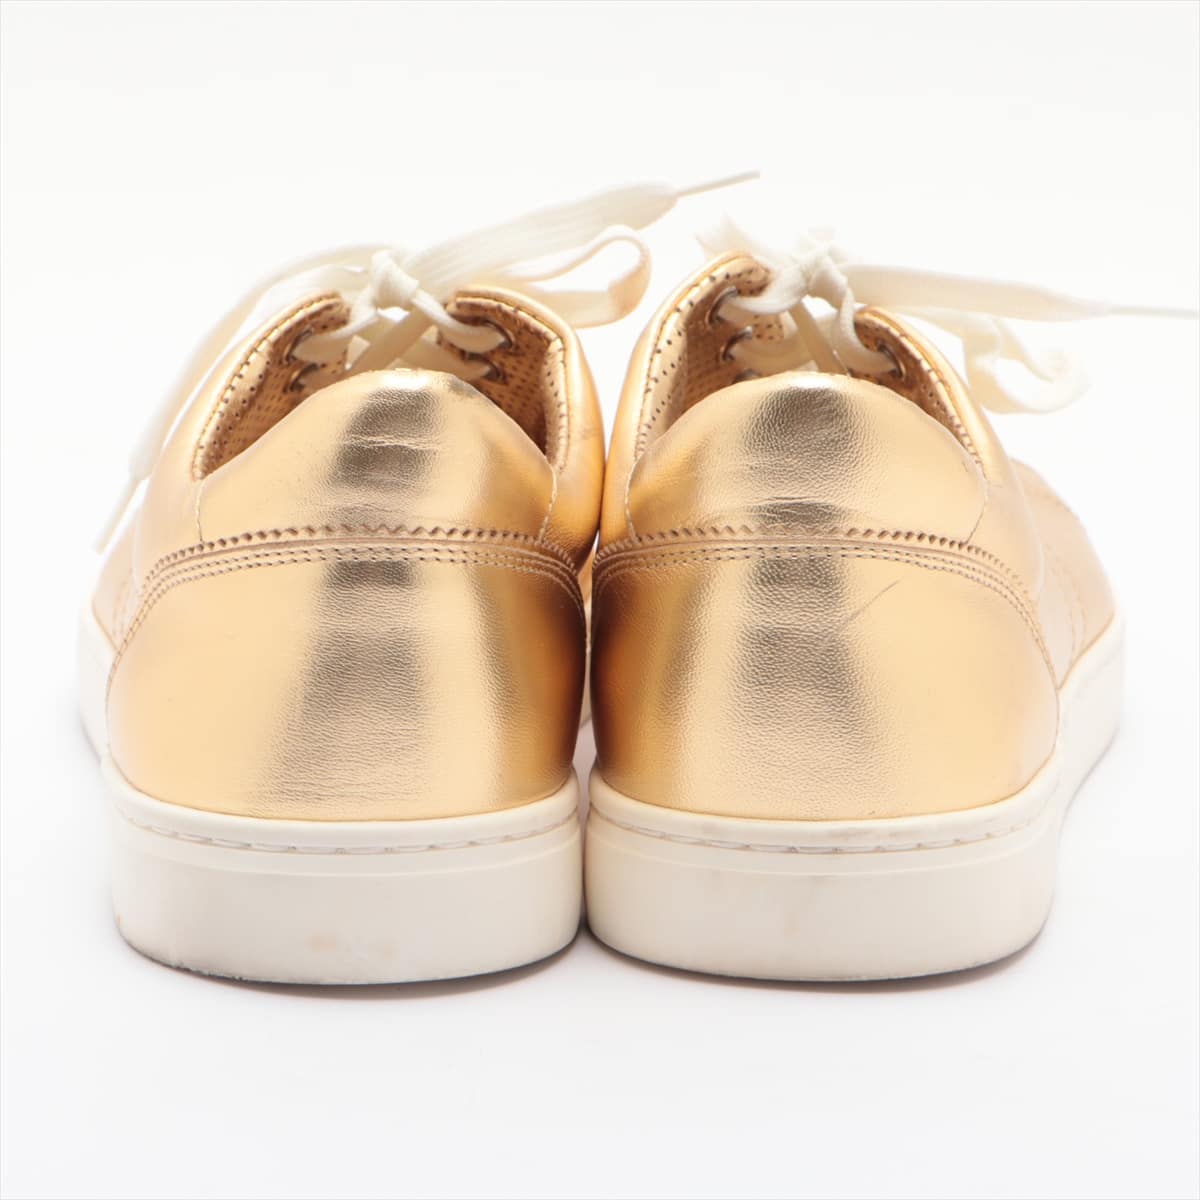 Dolce & Gabbana Leather Sneakers 8.5 Men's Gold